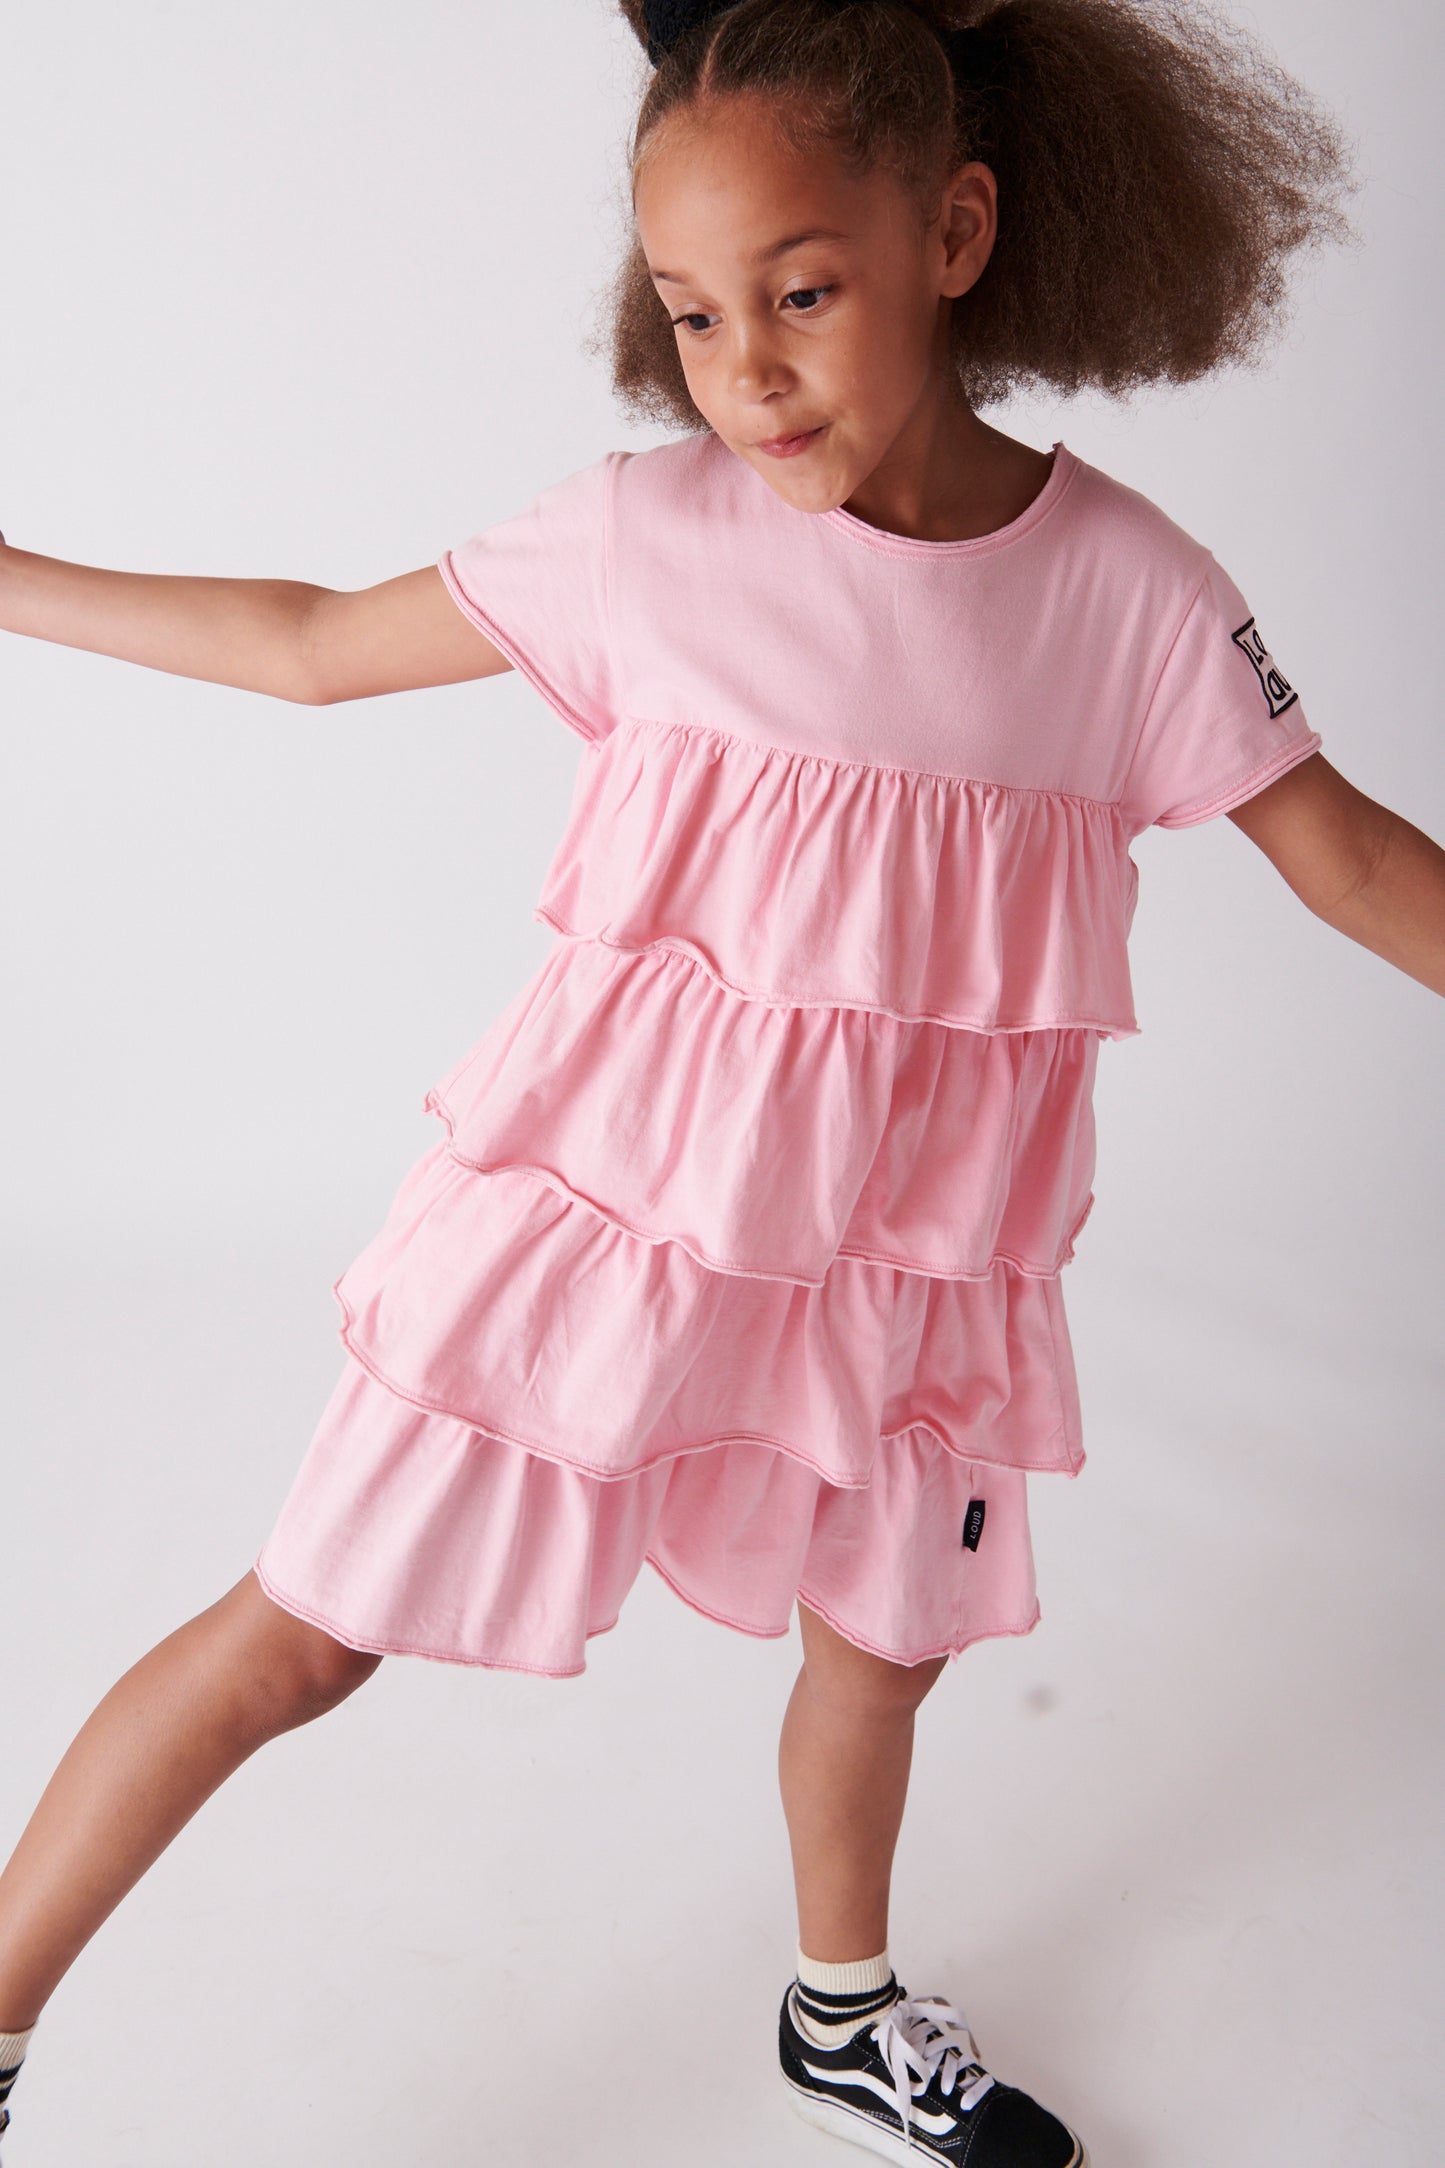 NATURE Pink Tiered Layers dress